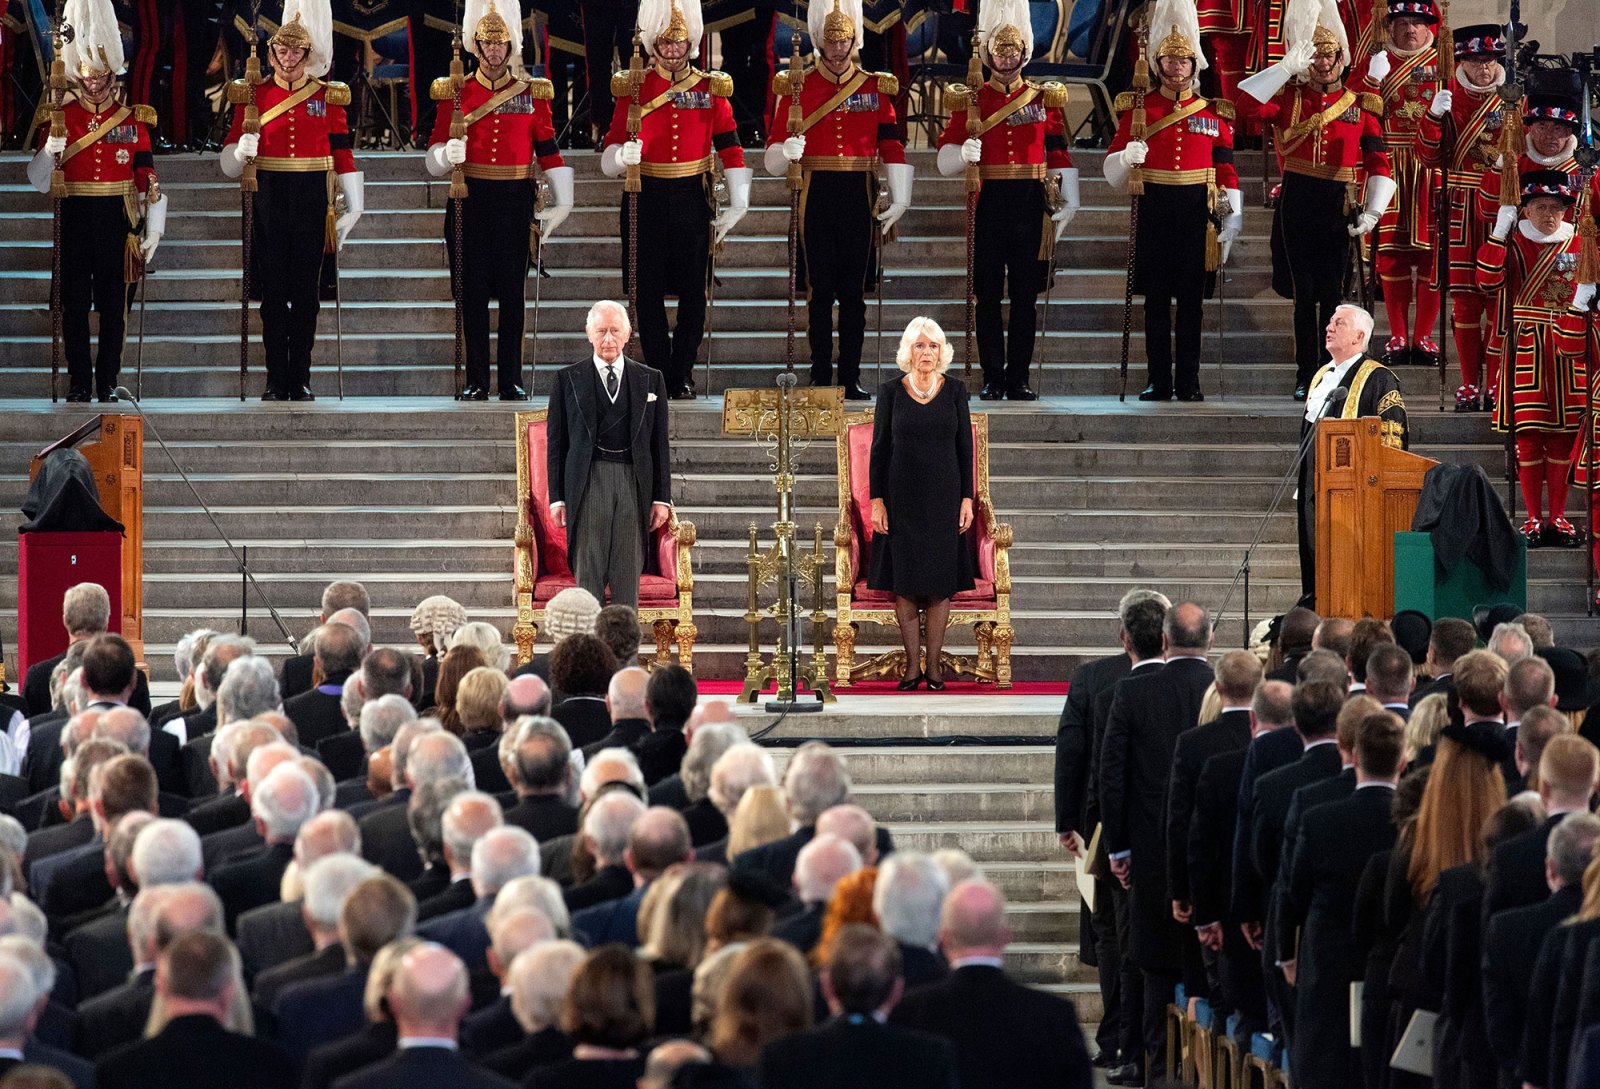 King Charles III and Camilla Queen Consort Sit on the Throne for the 1st Time During Parliament Address 4